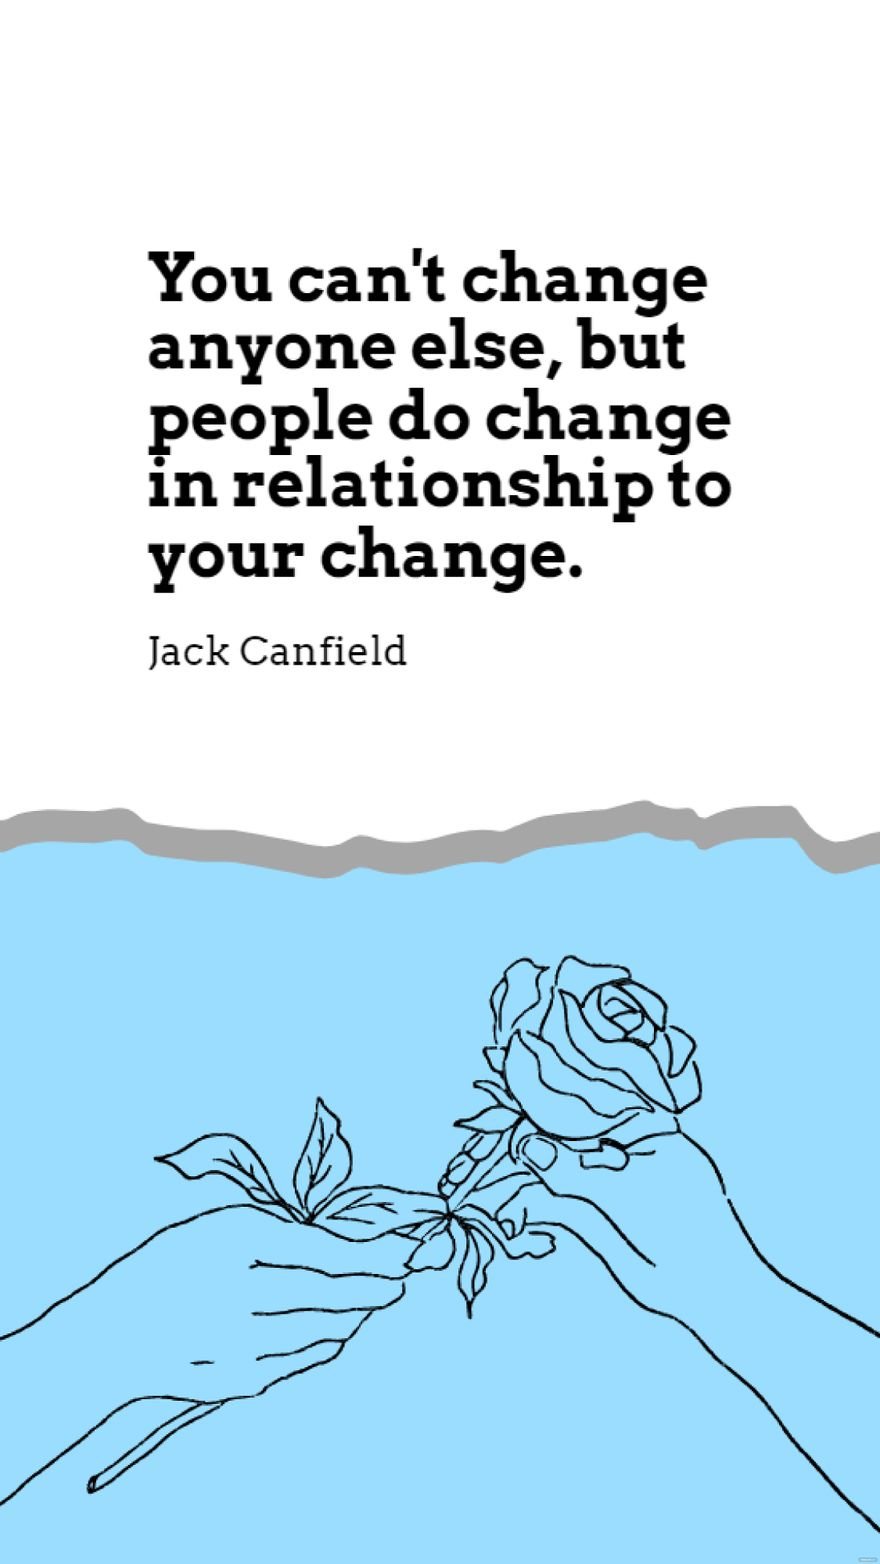 Jack Canfield - You can't change anyone else, but people do change in relationship to your change.